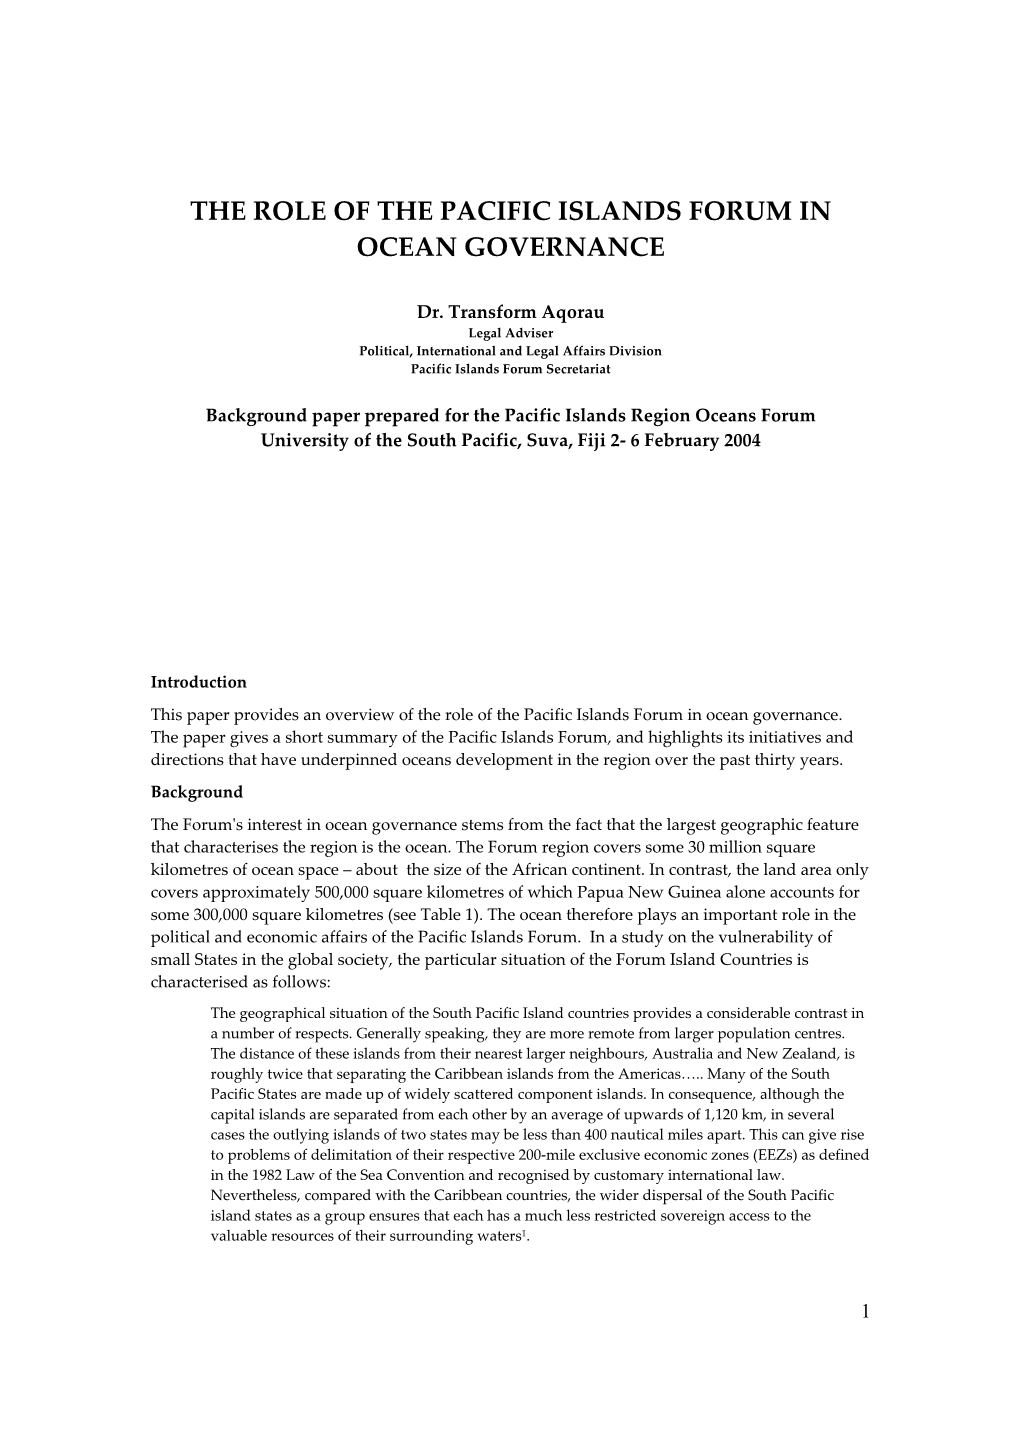 The Role of the Pacific Islands Forum in Ocean Governance